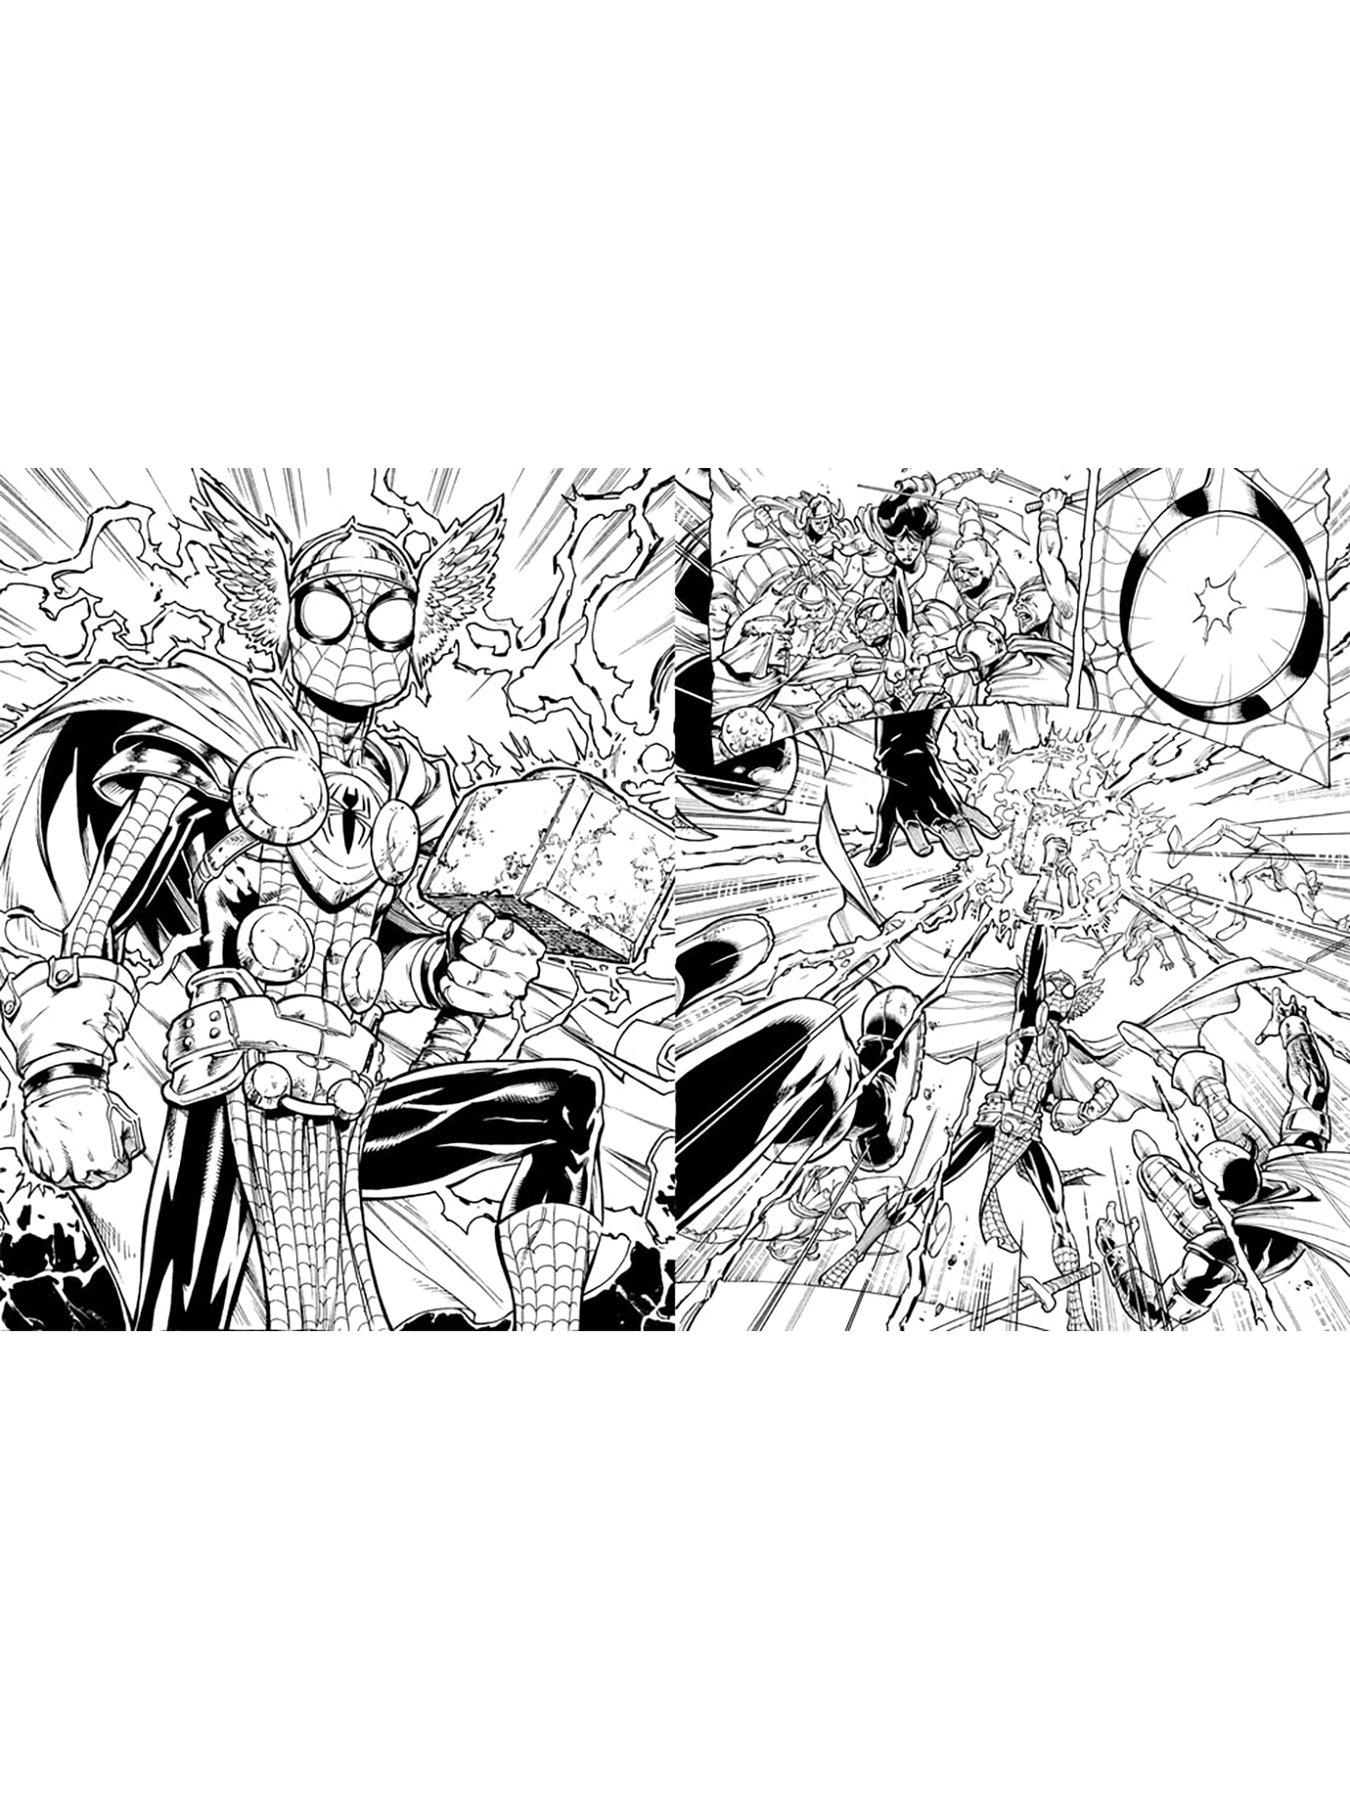 Marvel Spider-Man Colouring Book: The Collector's Edition